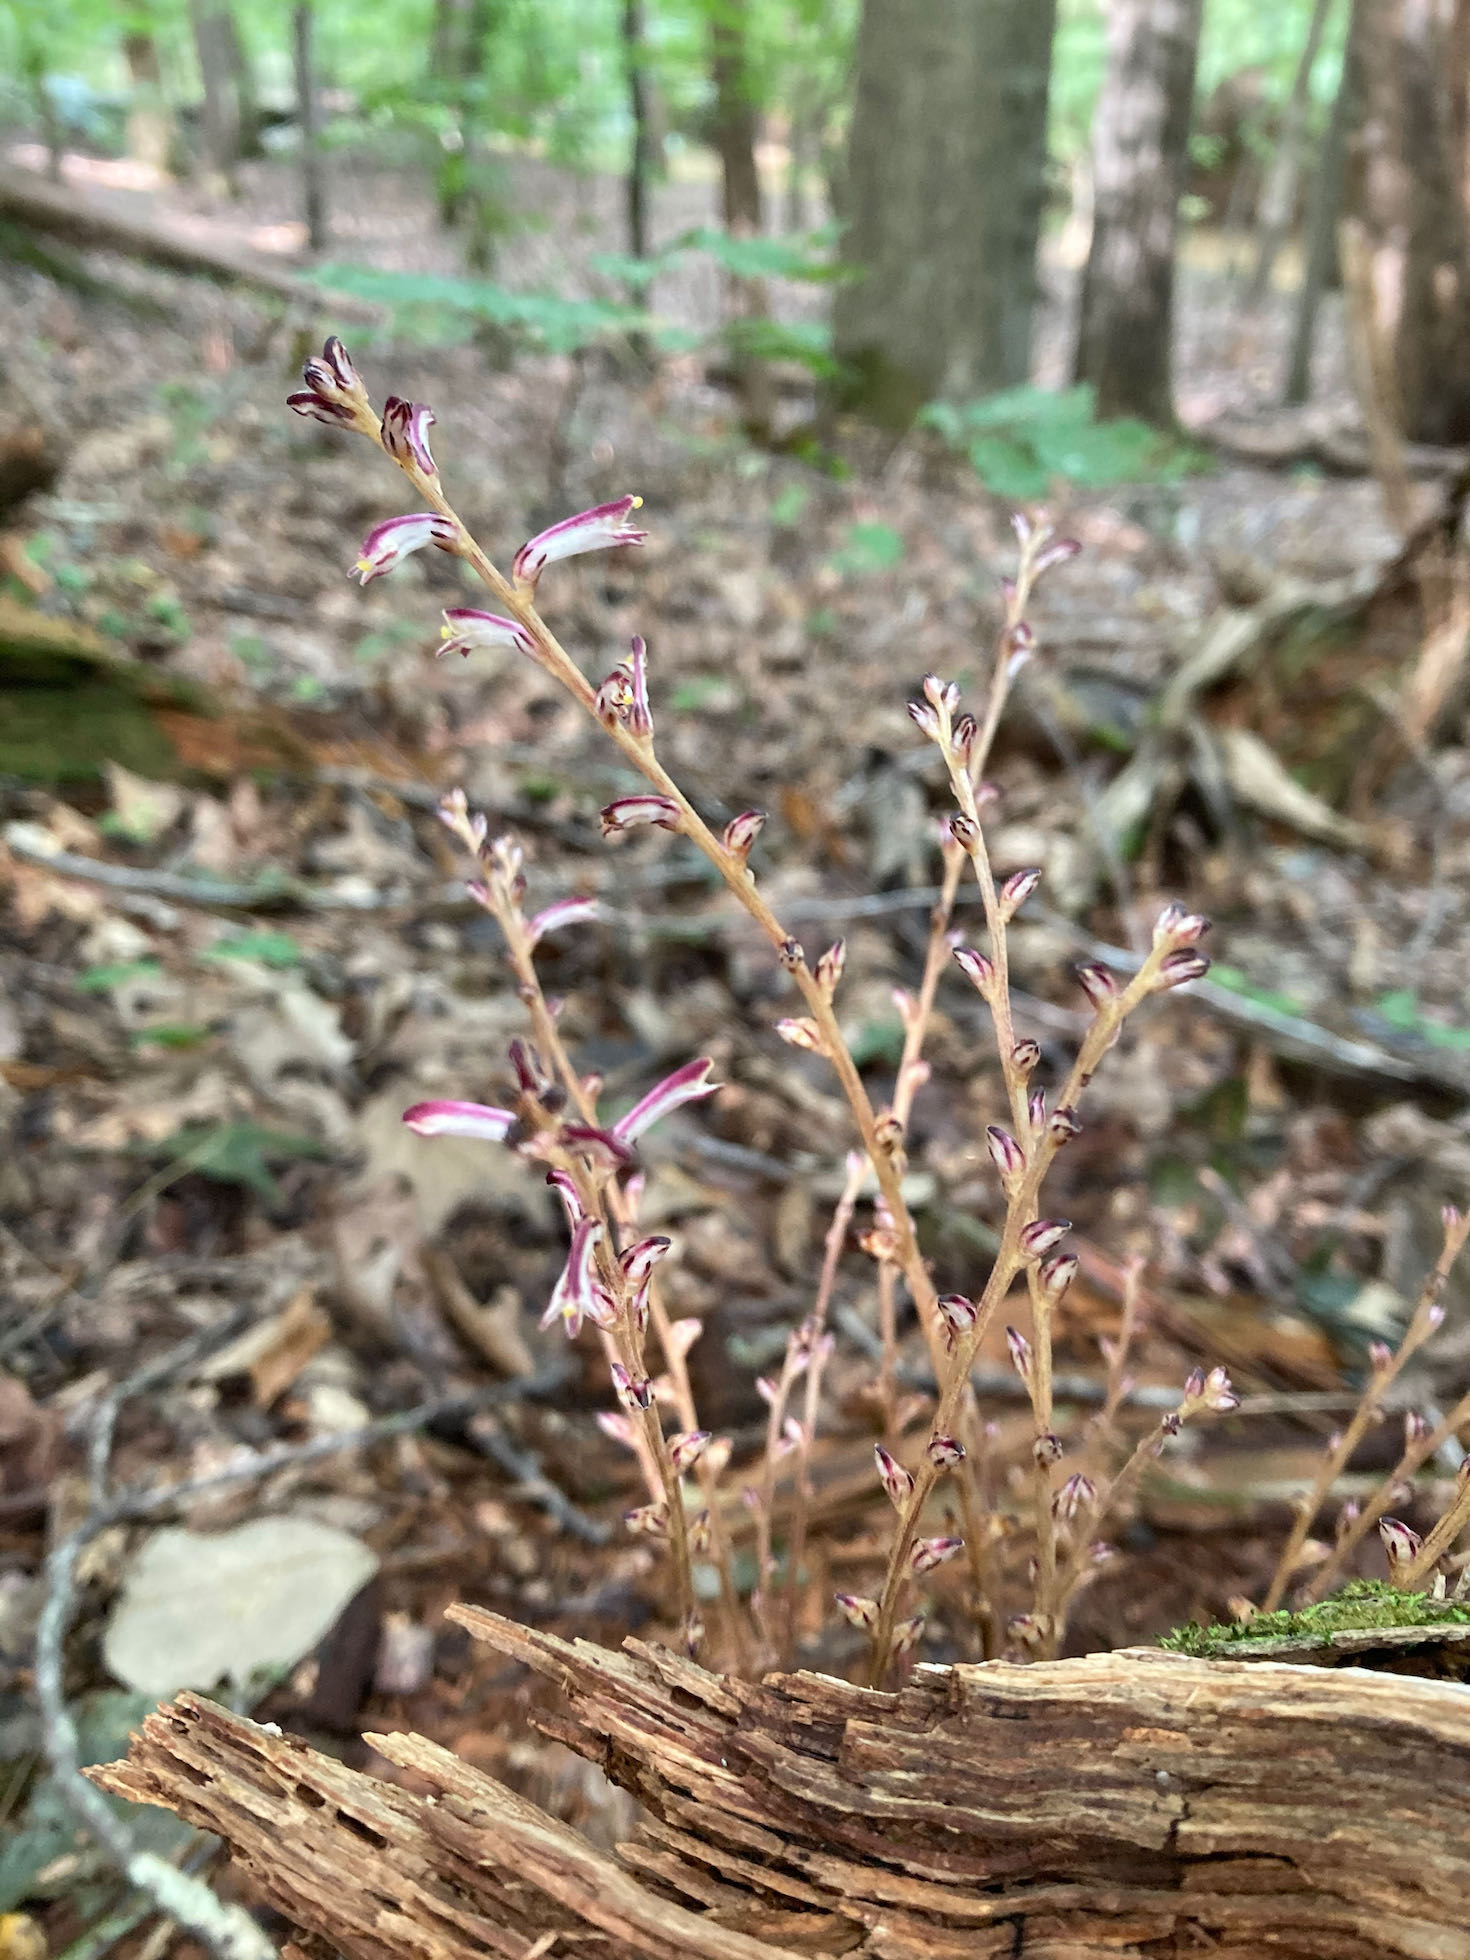 The Scientific Name is Epifagus virginiana. You will likely hear them called Beechdrops, Beech-drops. This picture shows the This achlorophyllous plant has multiple stems and small scale-like leaves. The inflorescence is a spike of scattered purple striped flowers. of Epifagus virginiana